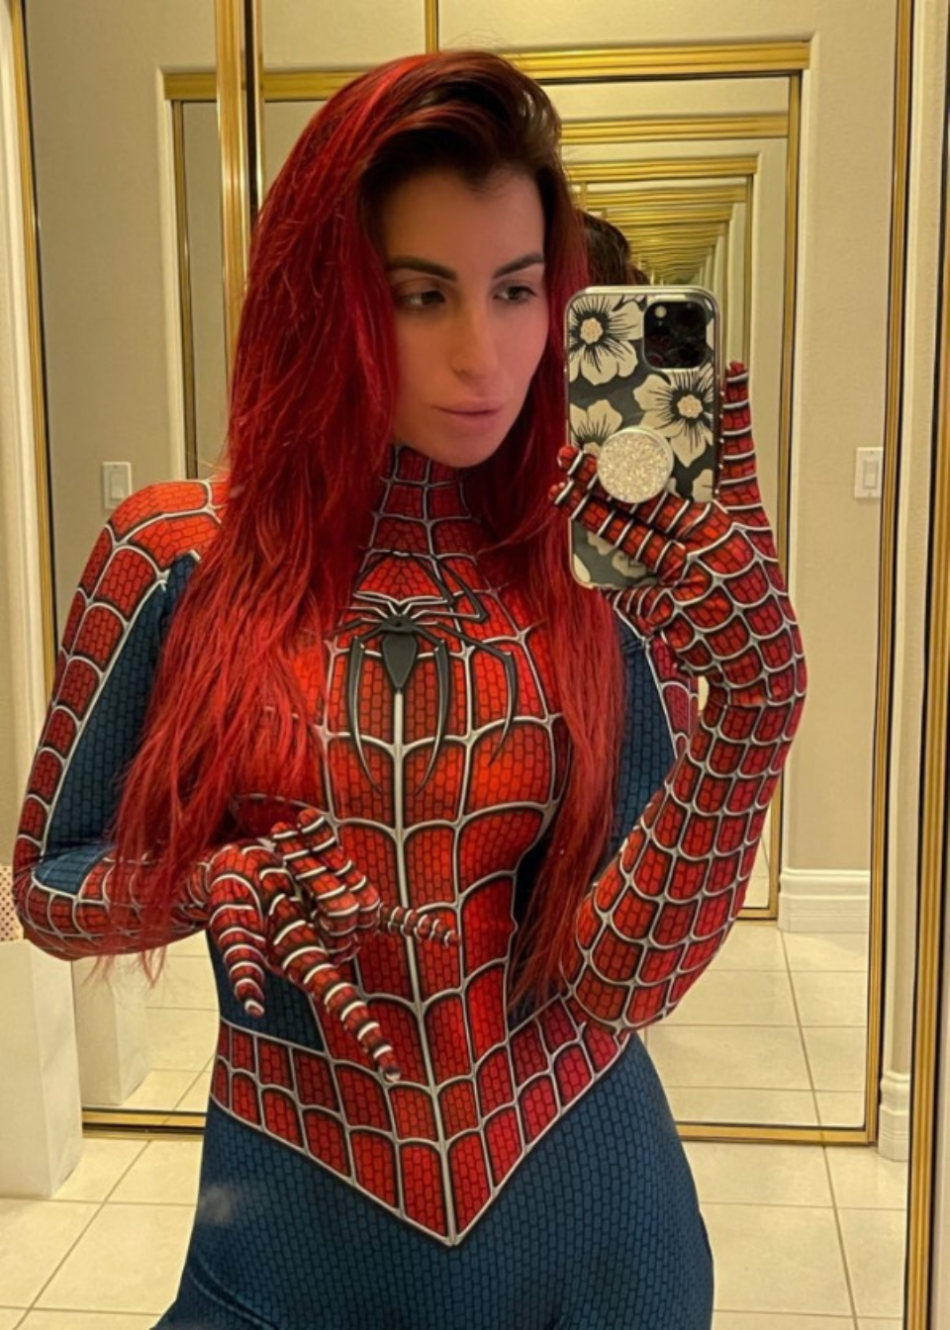 Sexy Red Hot Cosplay Girls Spiderman Women Best Photo Compilation 2021 (89 HQ Photos) 186